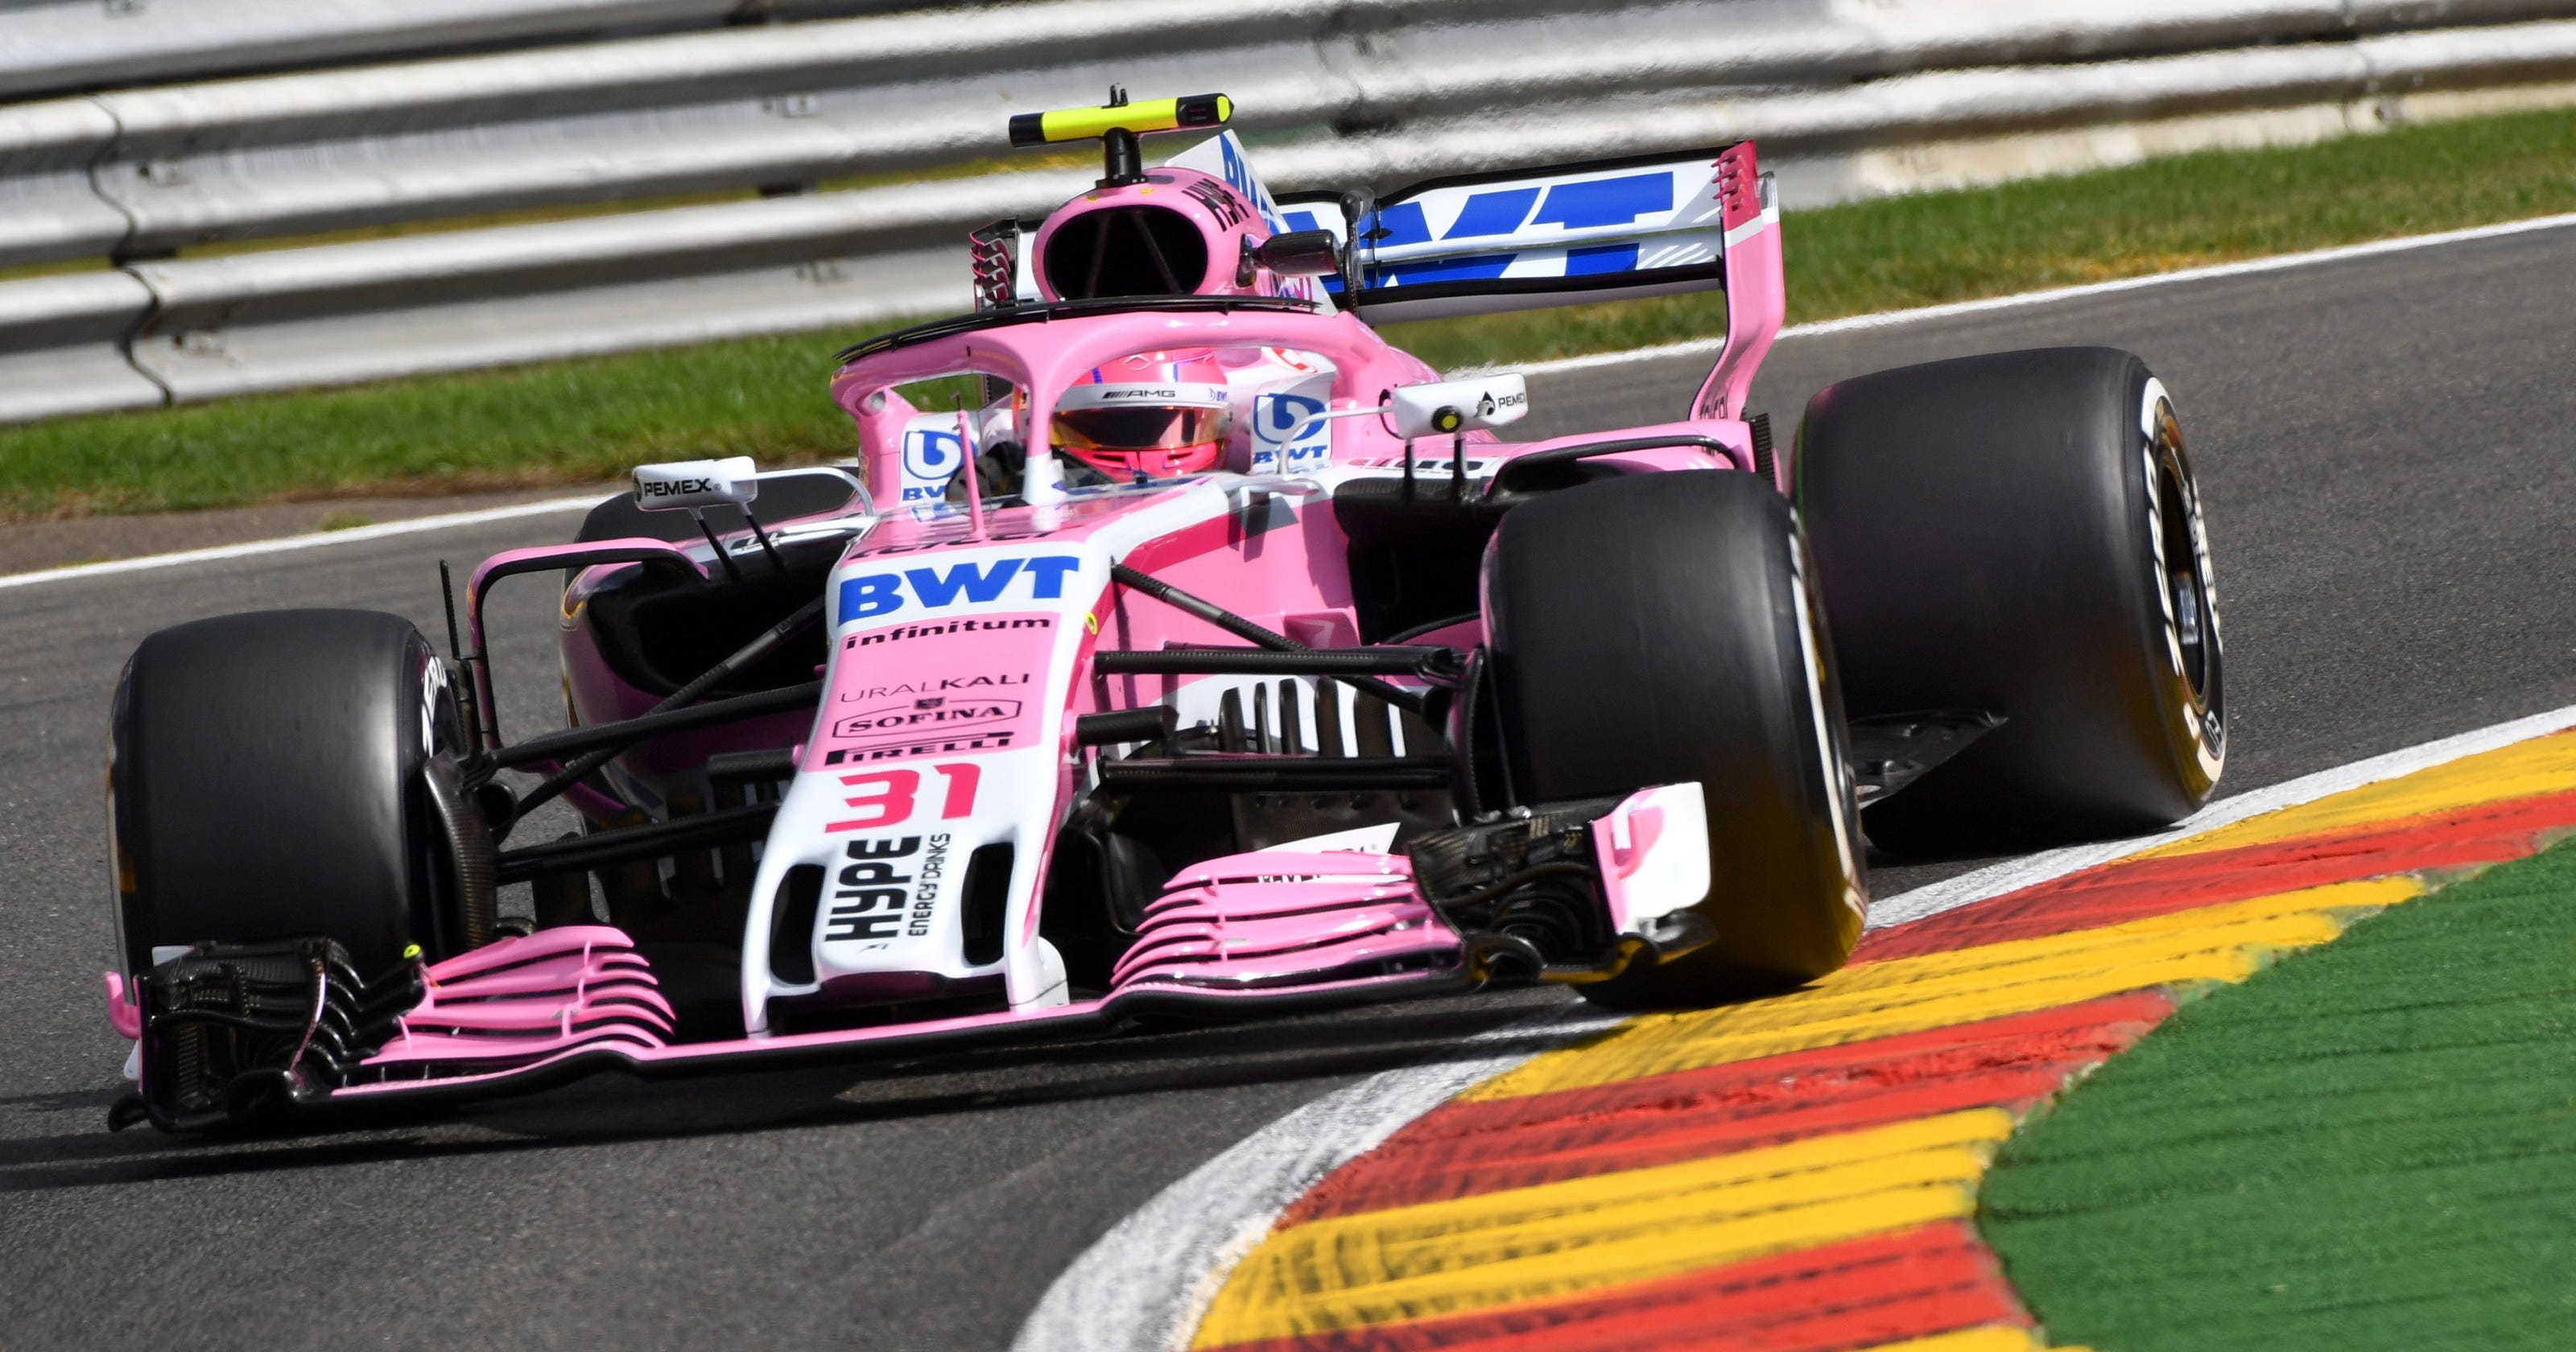 Force India to remain in F1 under new name after takeover